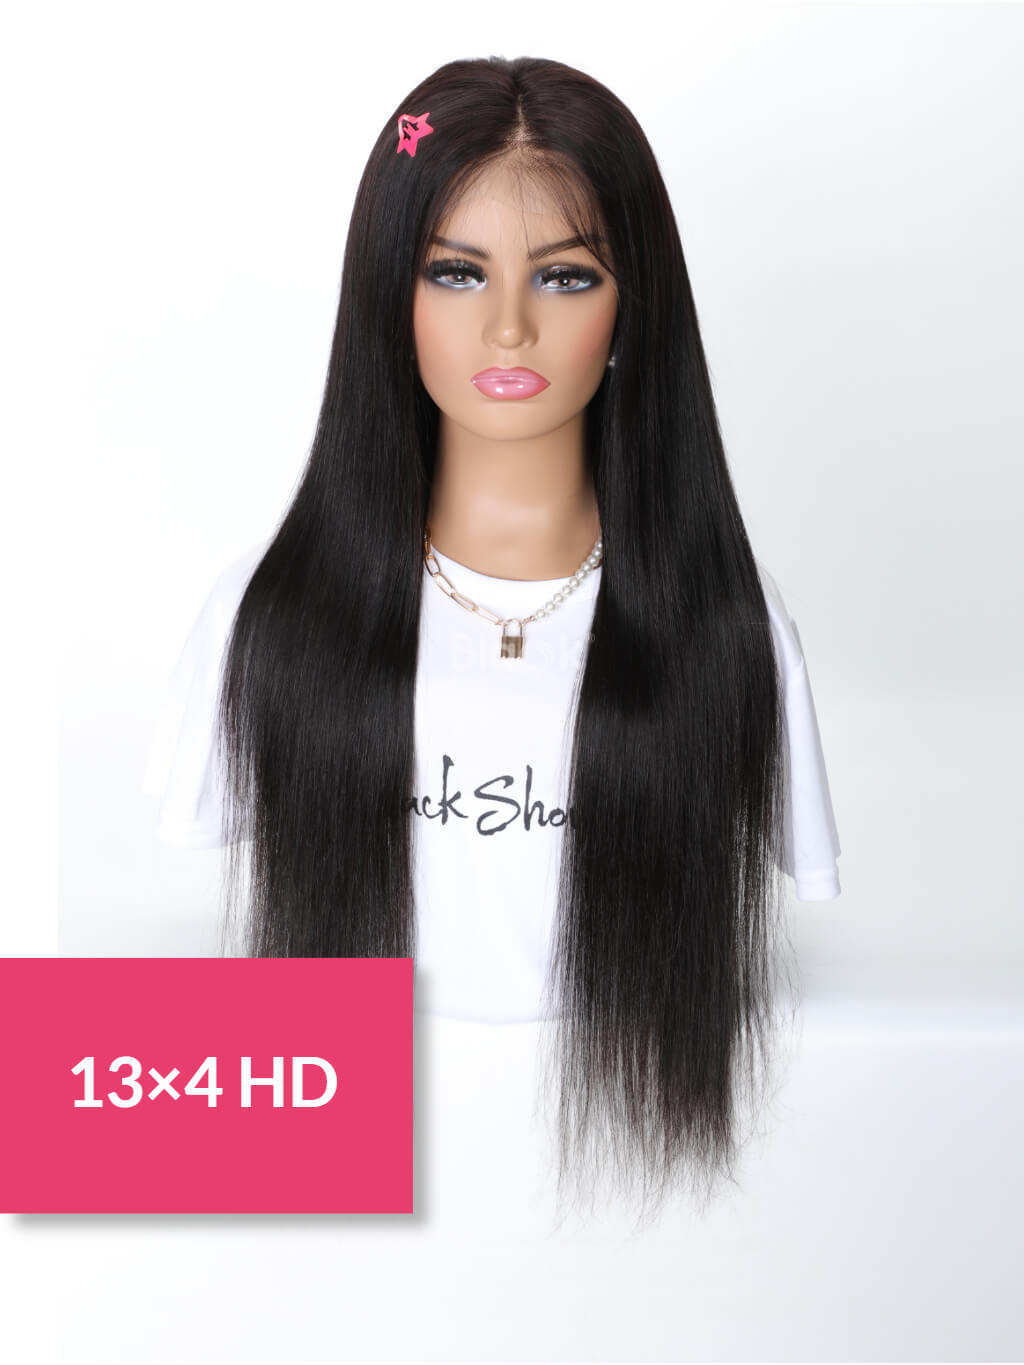 13x4 hd lace frontal wig straight hair